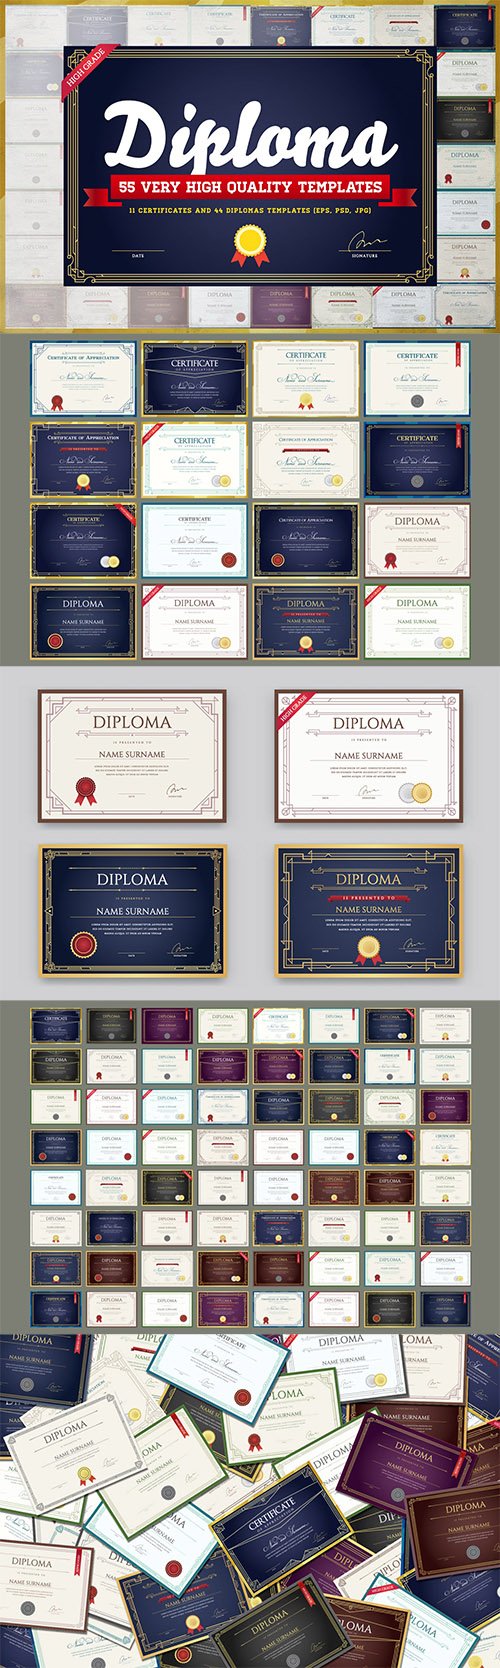 Awesome 55 Diploma & Certificate Templates